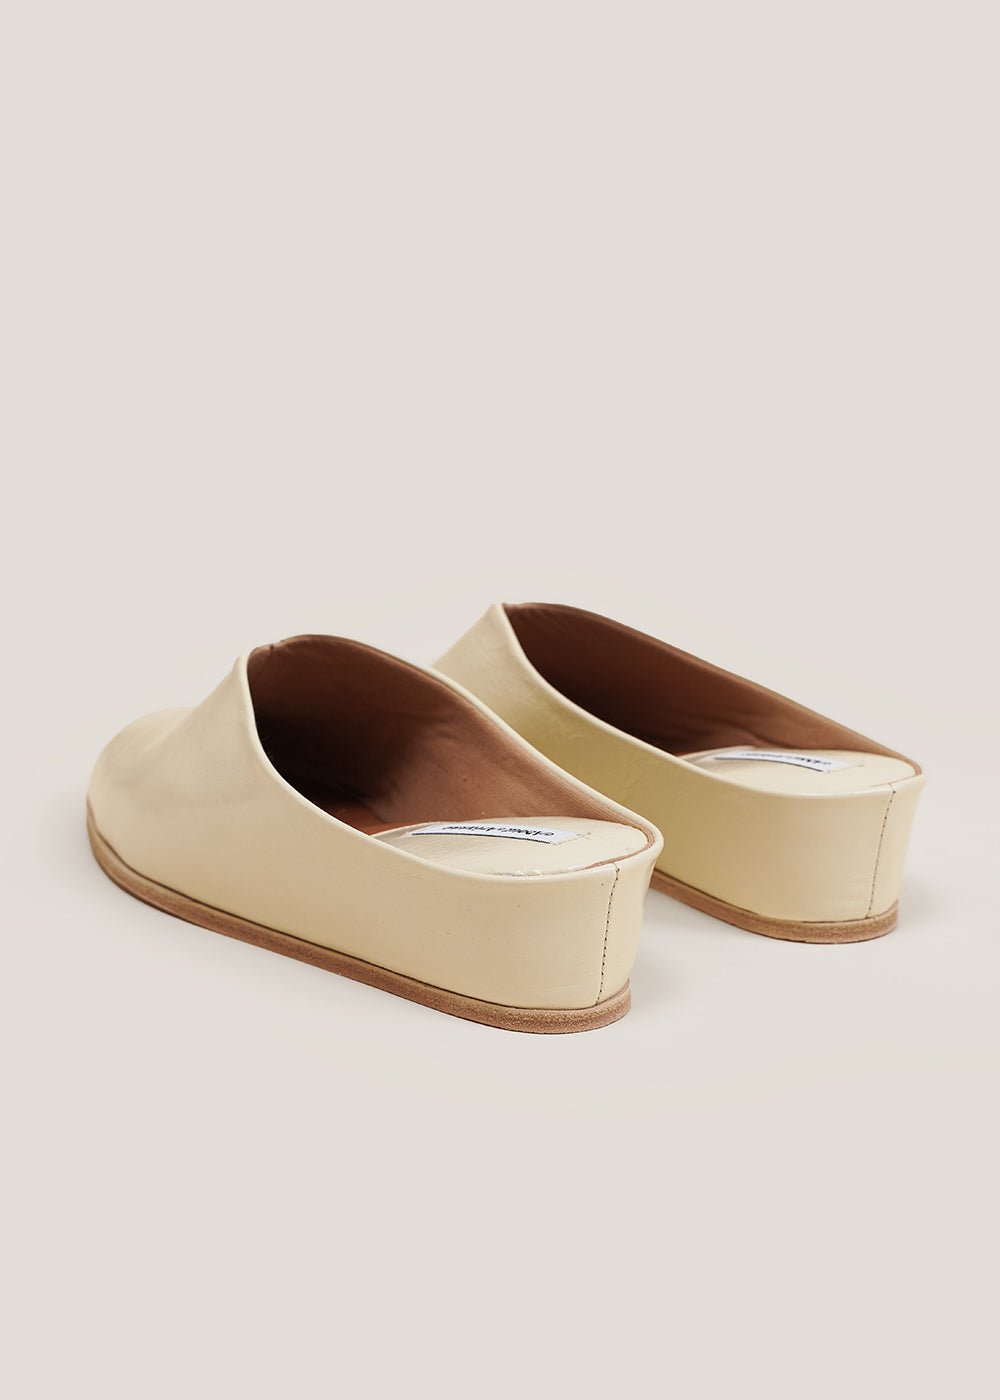 About Arianne Bianco Bao Walk Mules - New Classics Studios Sustainable Ethical Fashion Canada